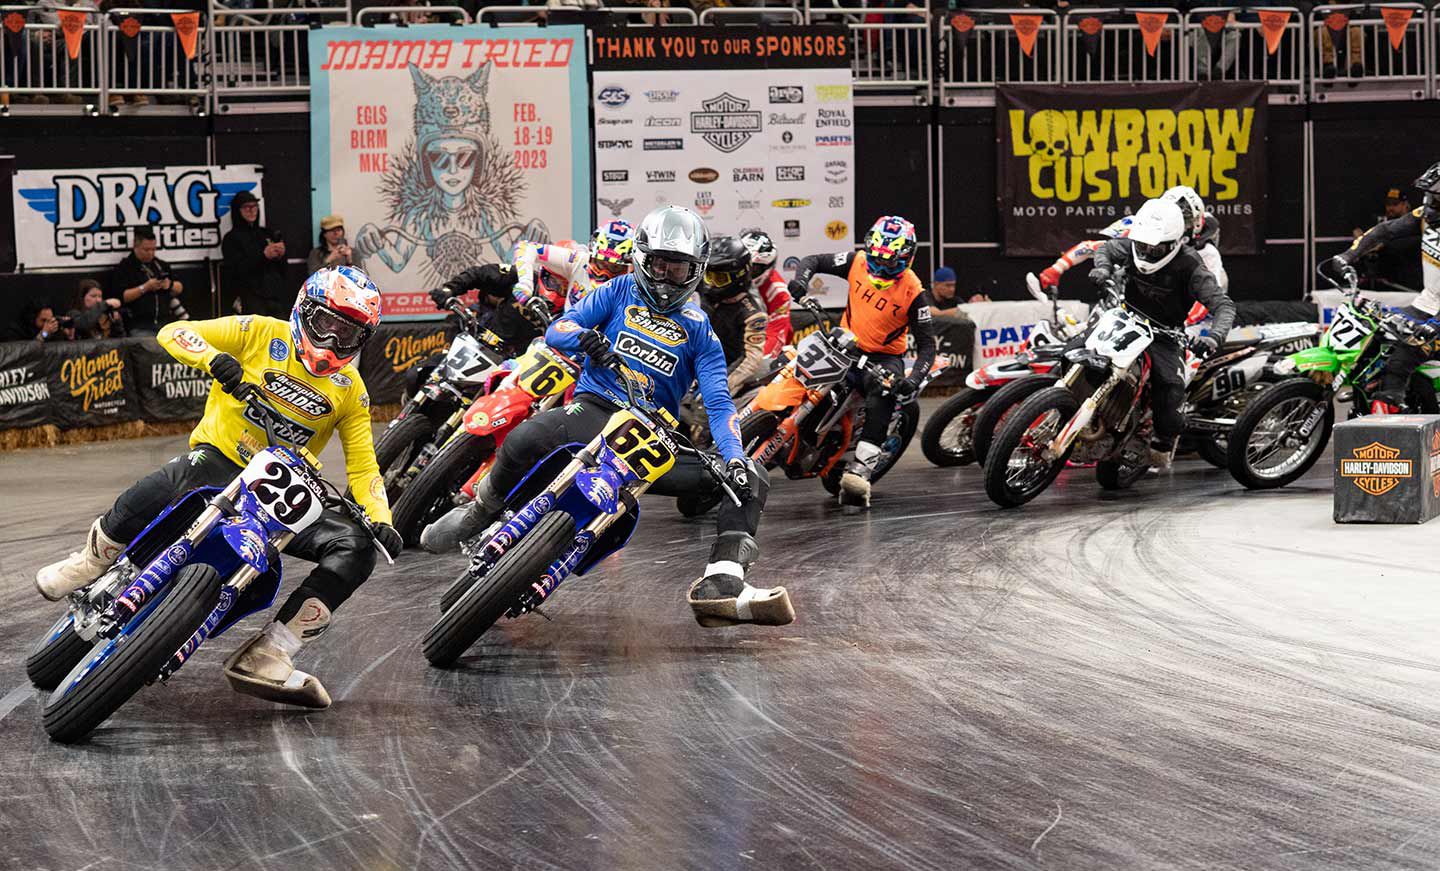 Steel shoes on the carpet: AA Pro racing in full effect.